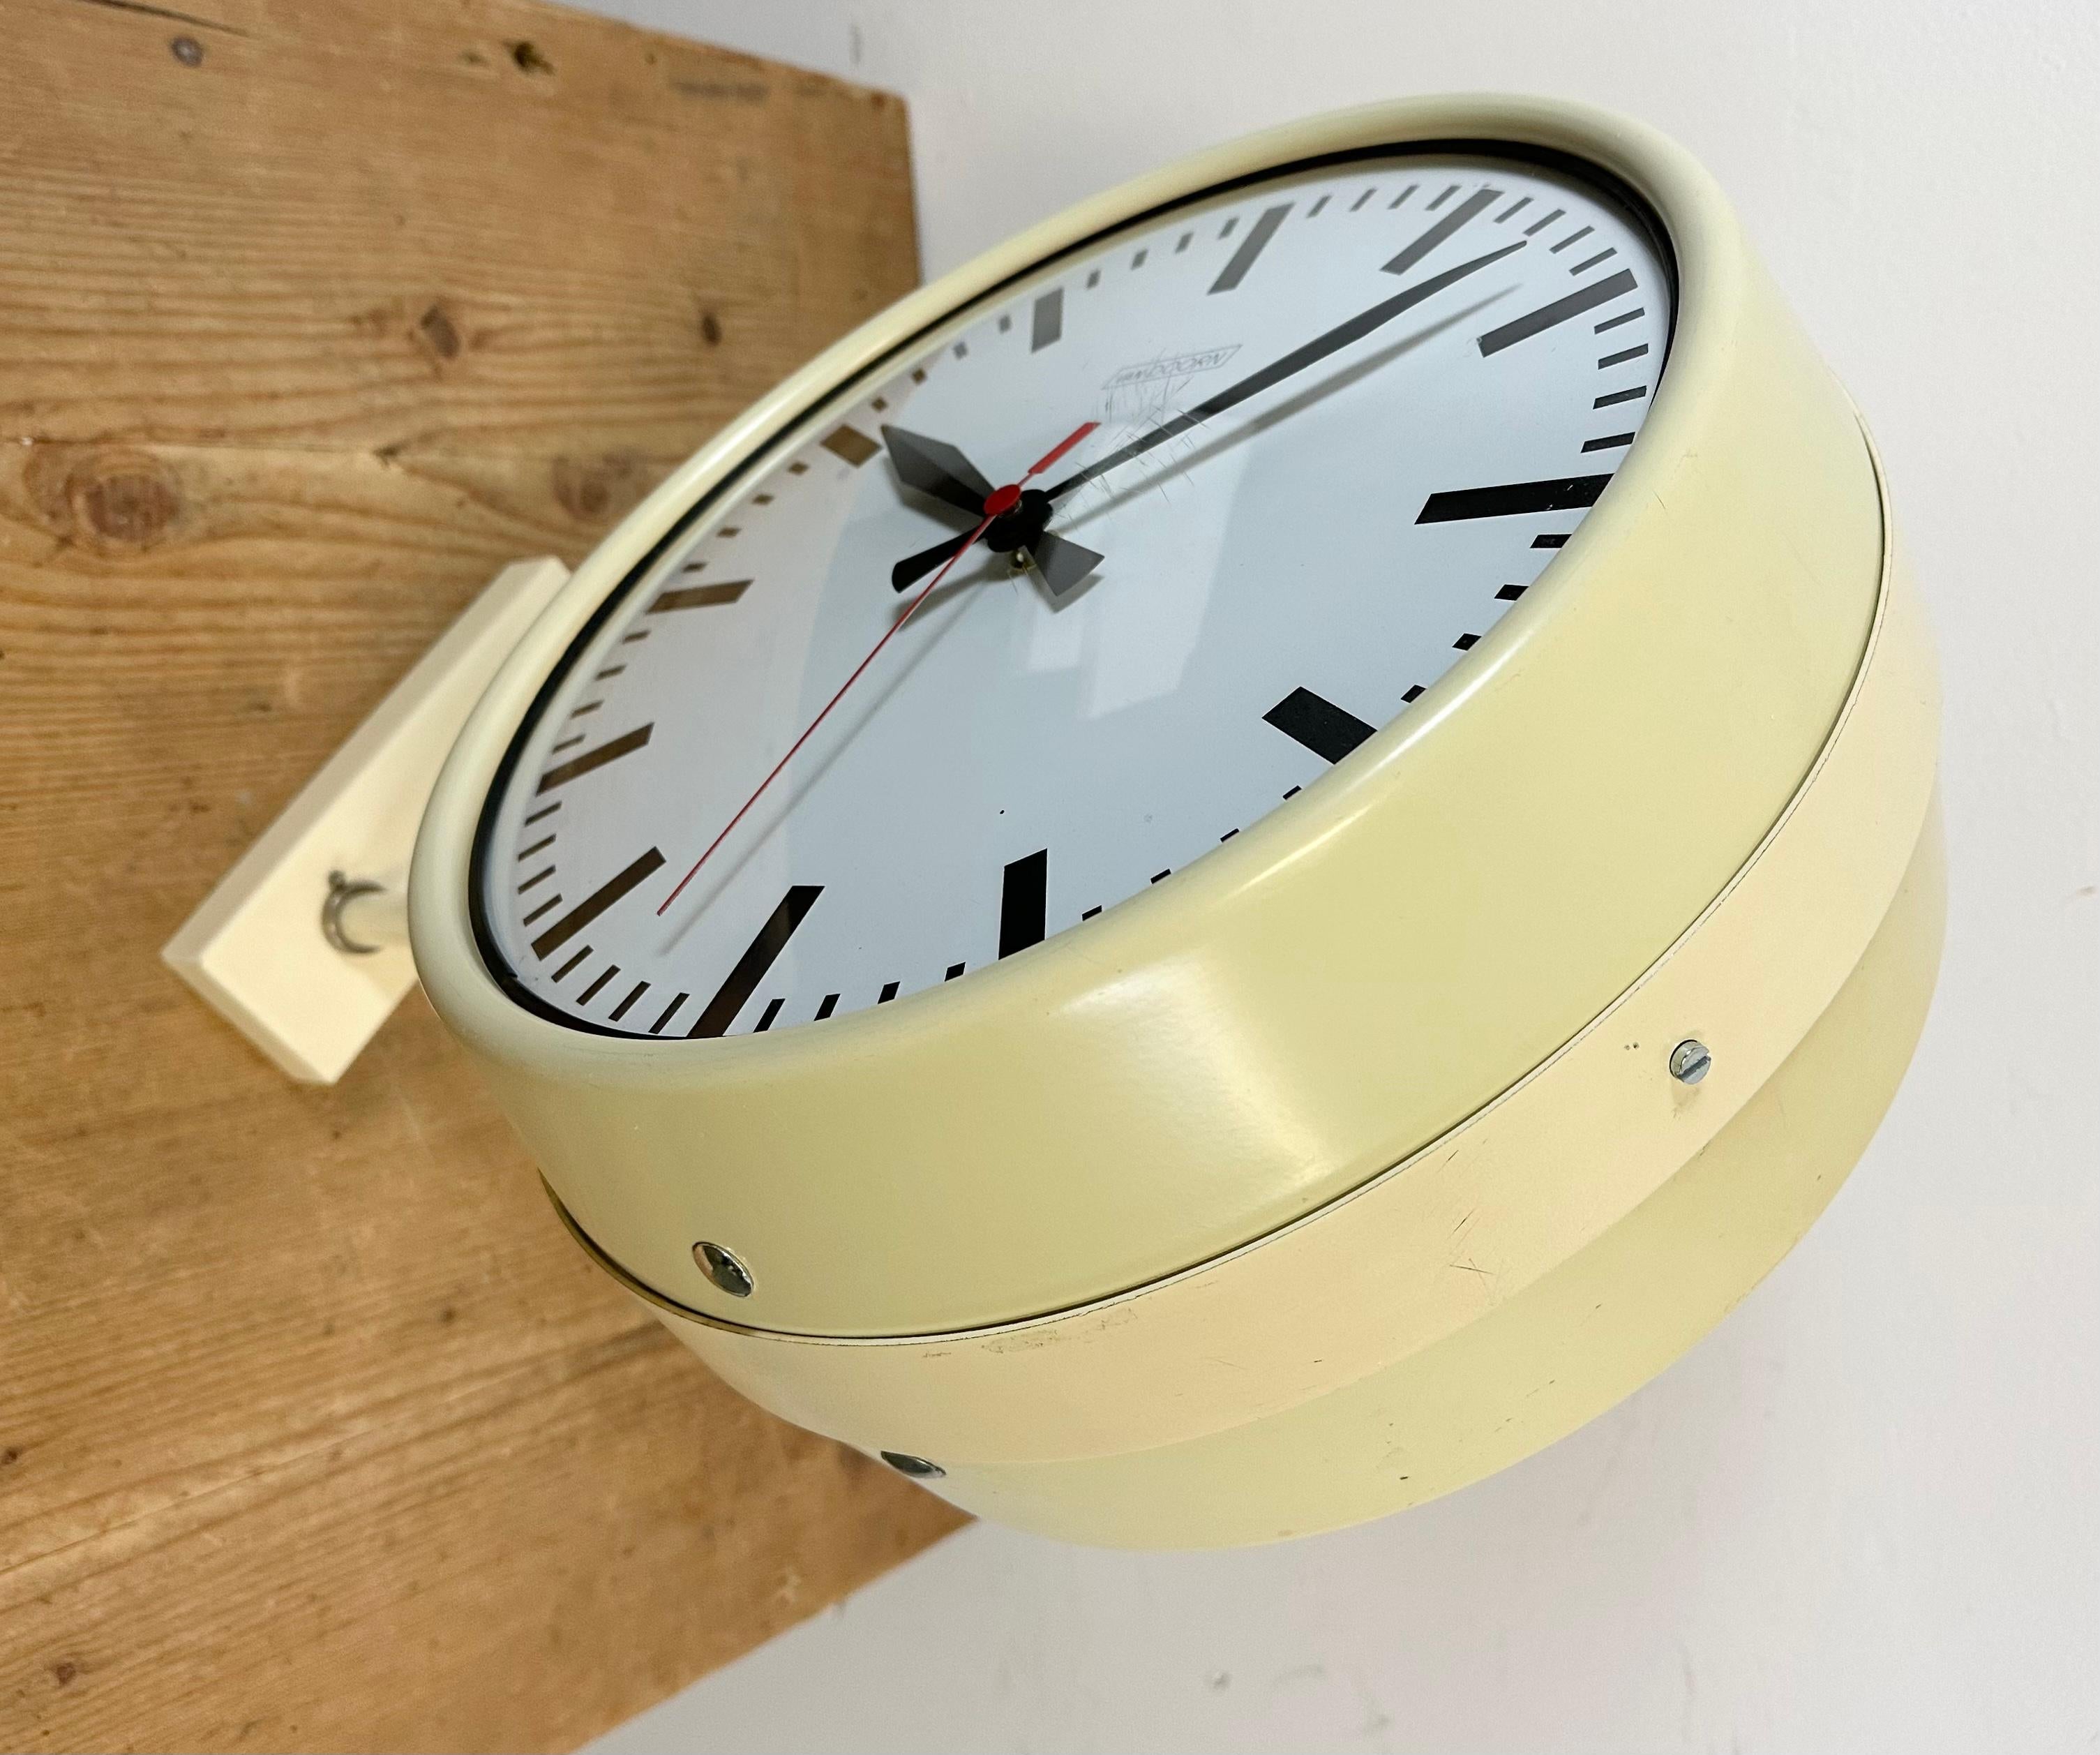 Vintage Beige Double Sided School or Station Wall Clock from Van Doorn, 1960s In Good Condition In Kojetice, CZ